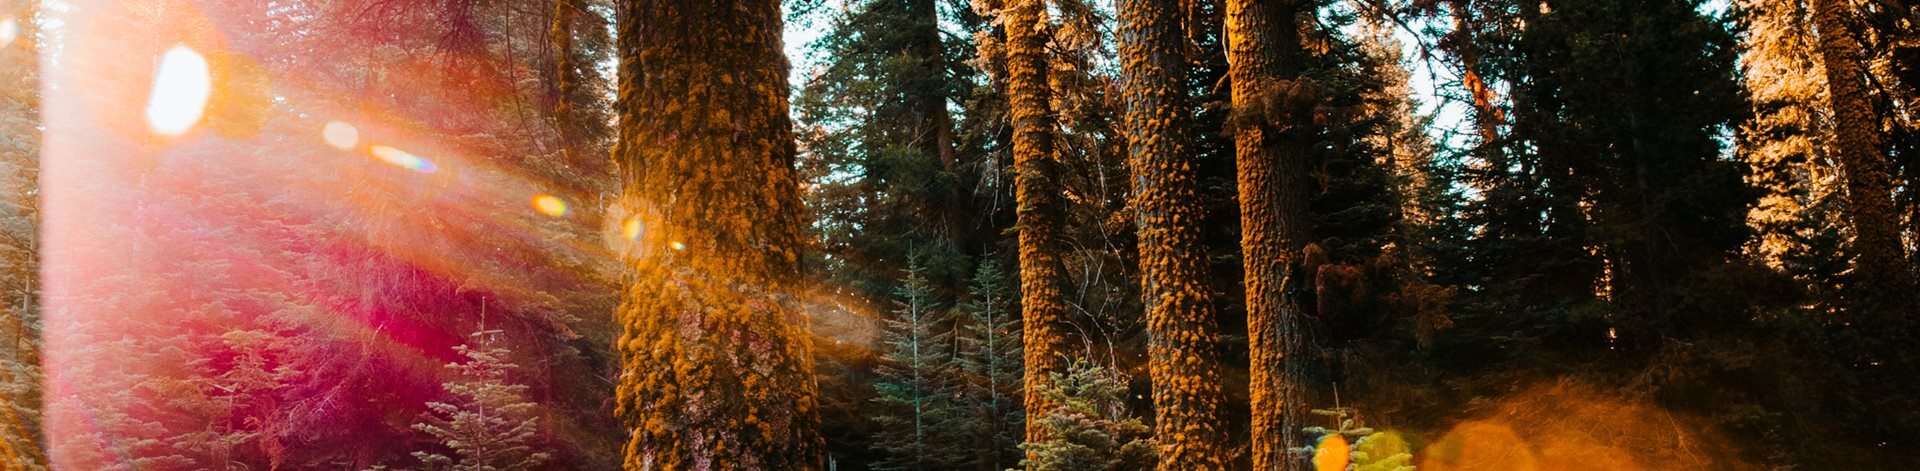 Evergreen forest with sun rays shining through from the left